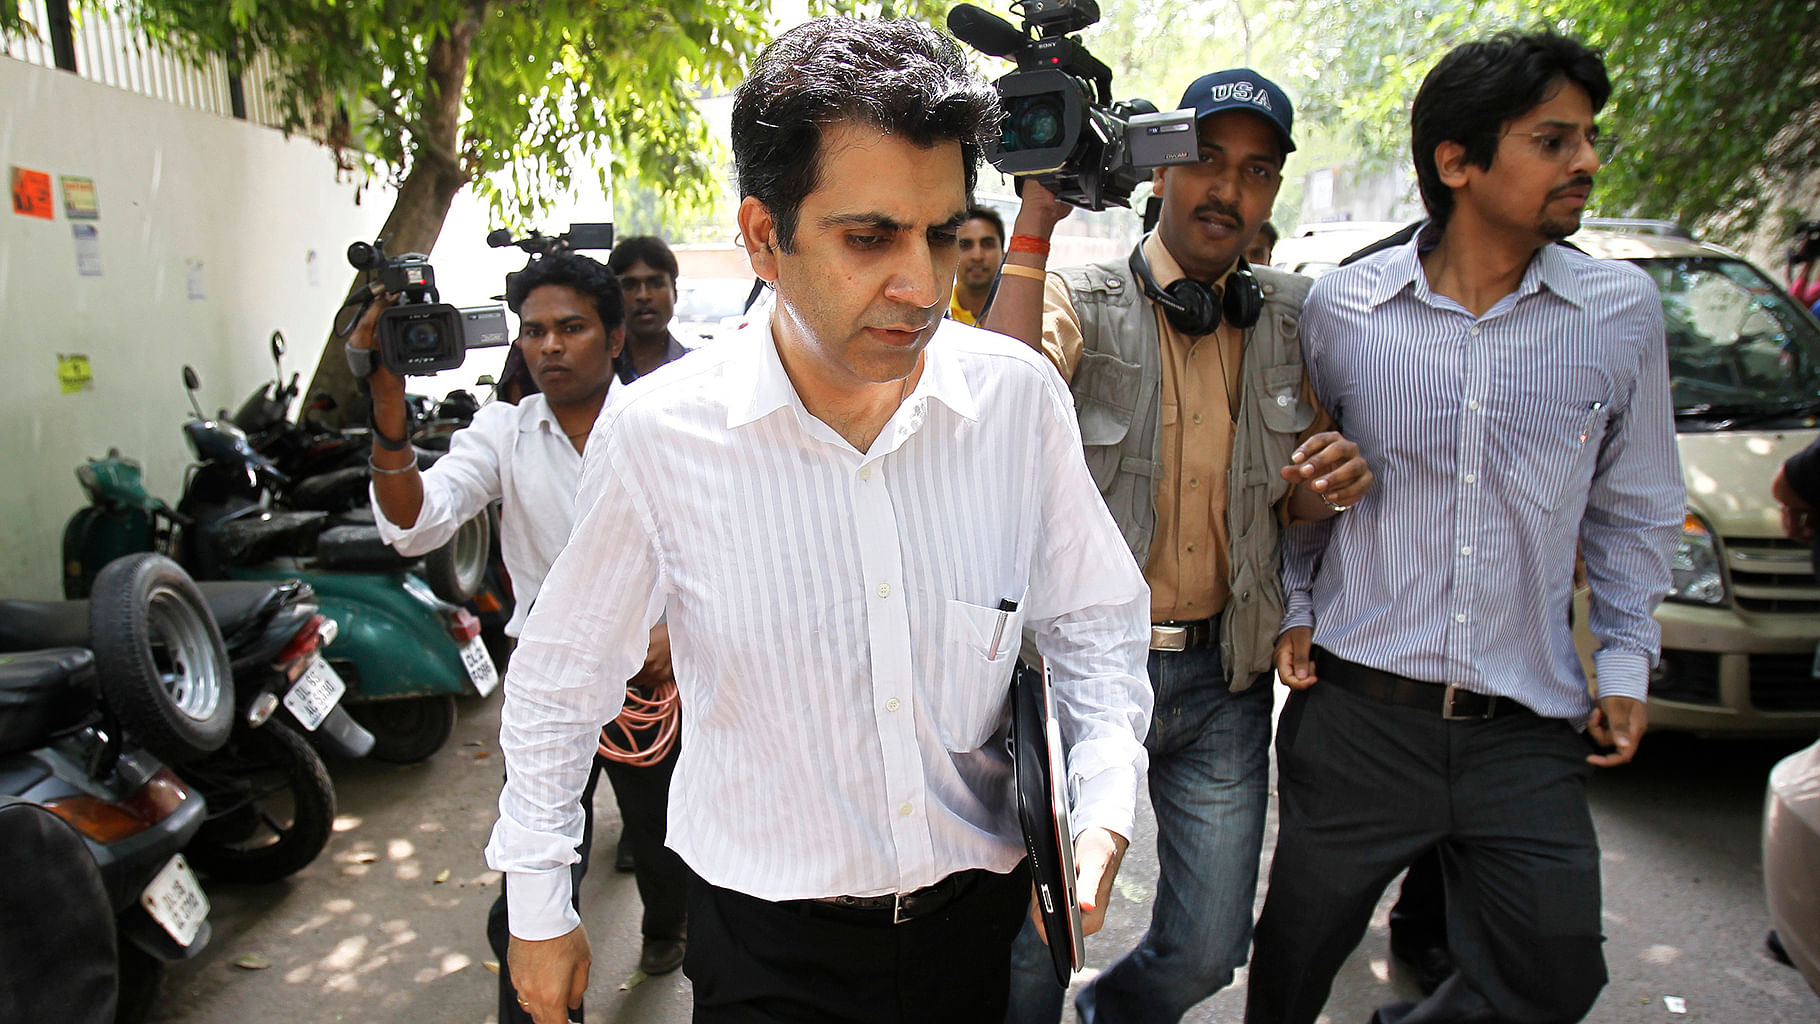 The tribunal also directed Unitech Managing Directors Sanjay Chandra and Ajay Chandra to file their replies.